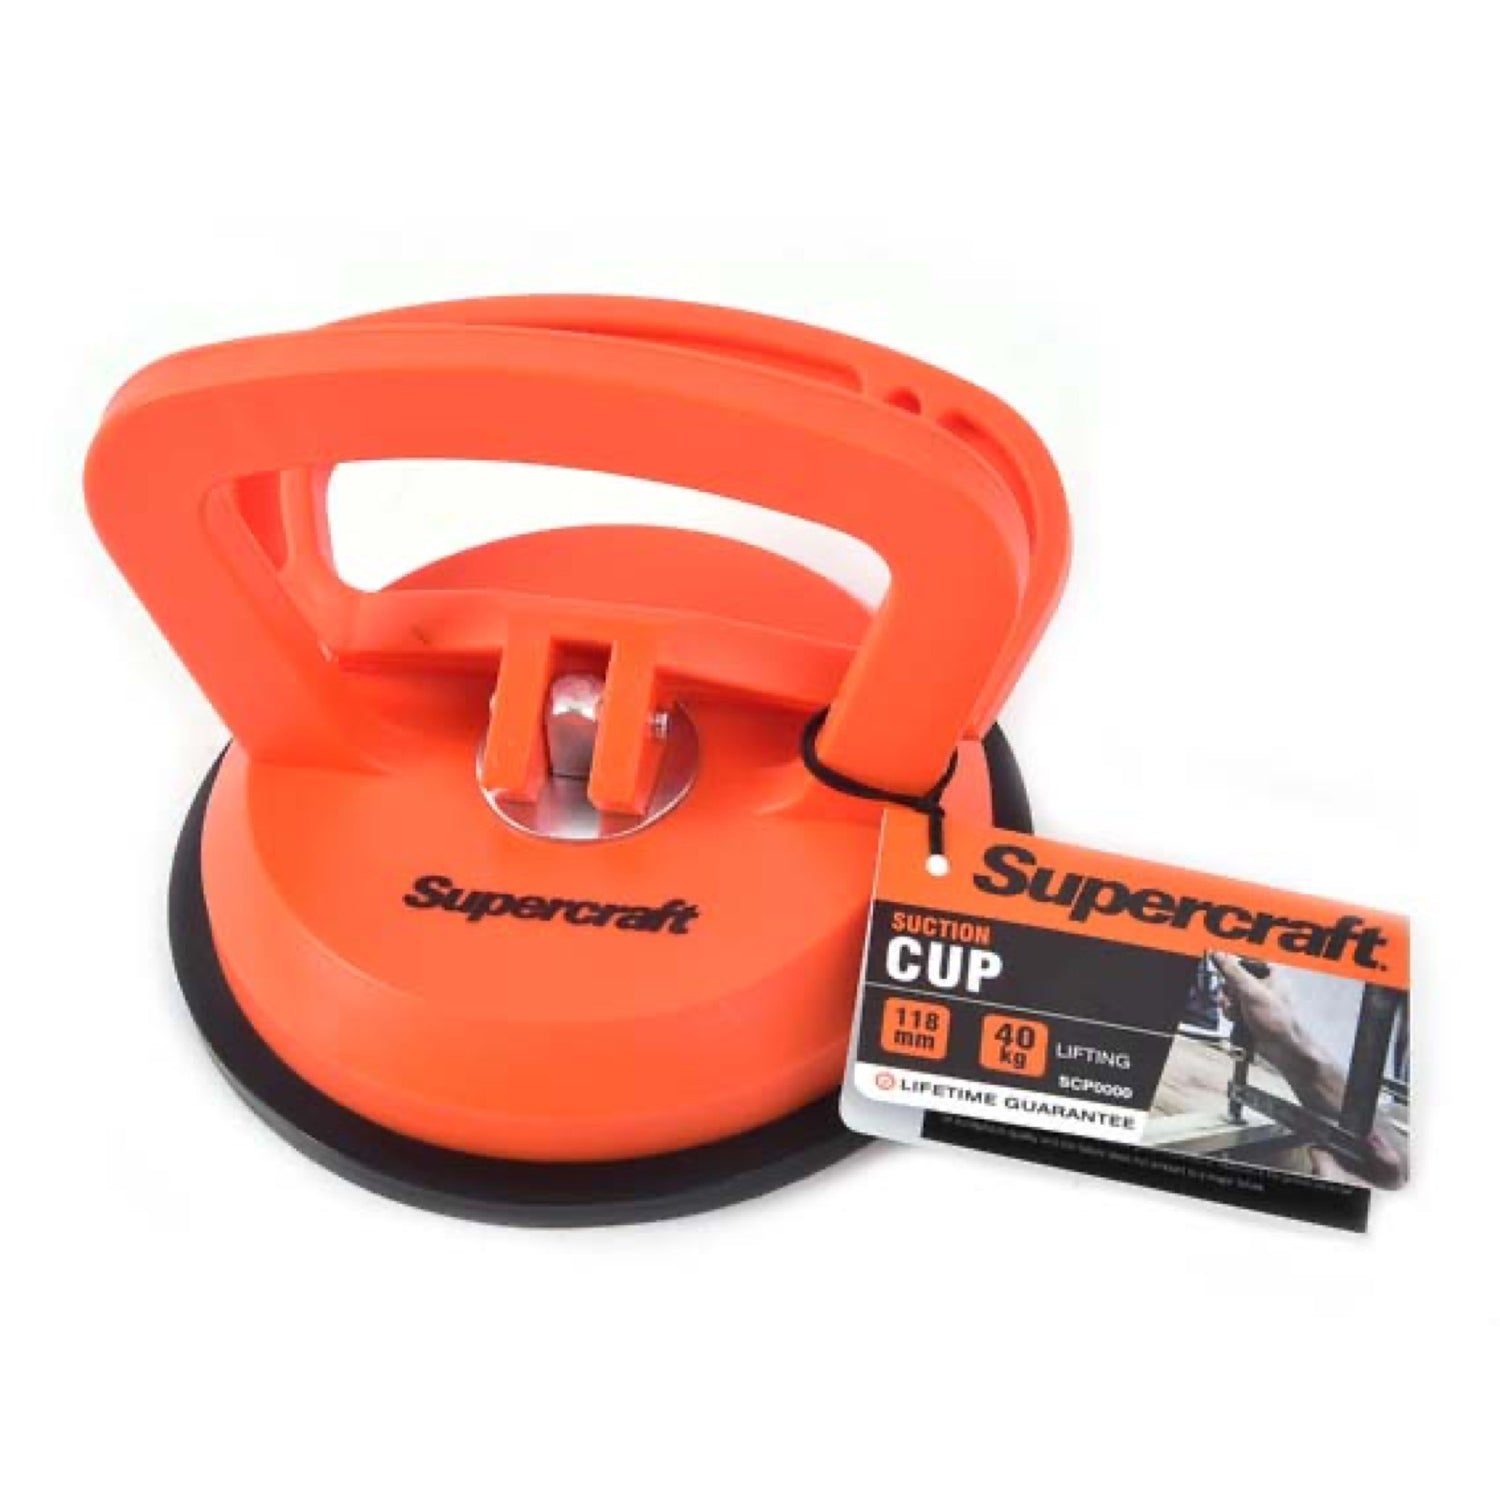 Supercraft Suction Cups